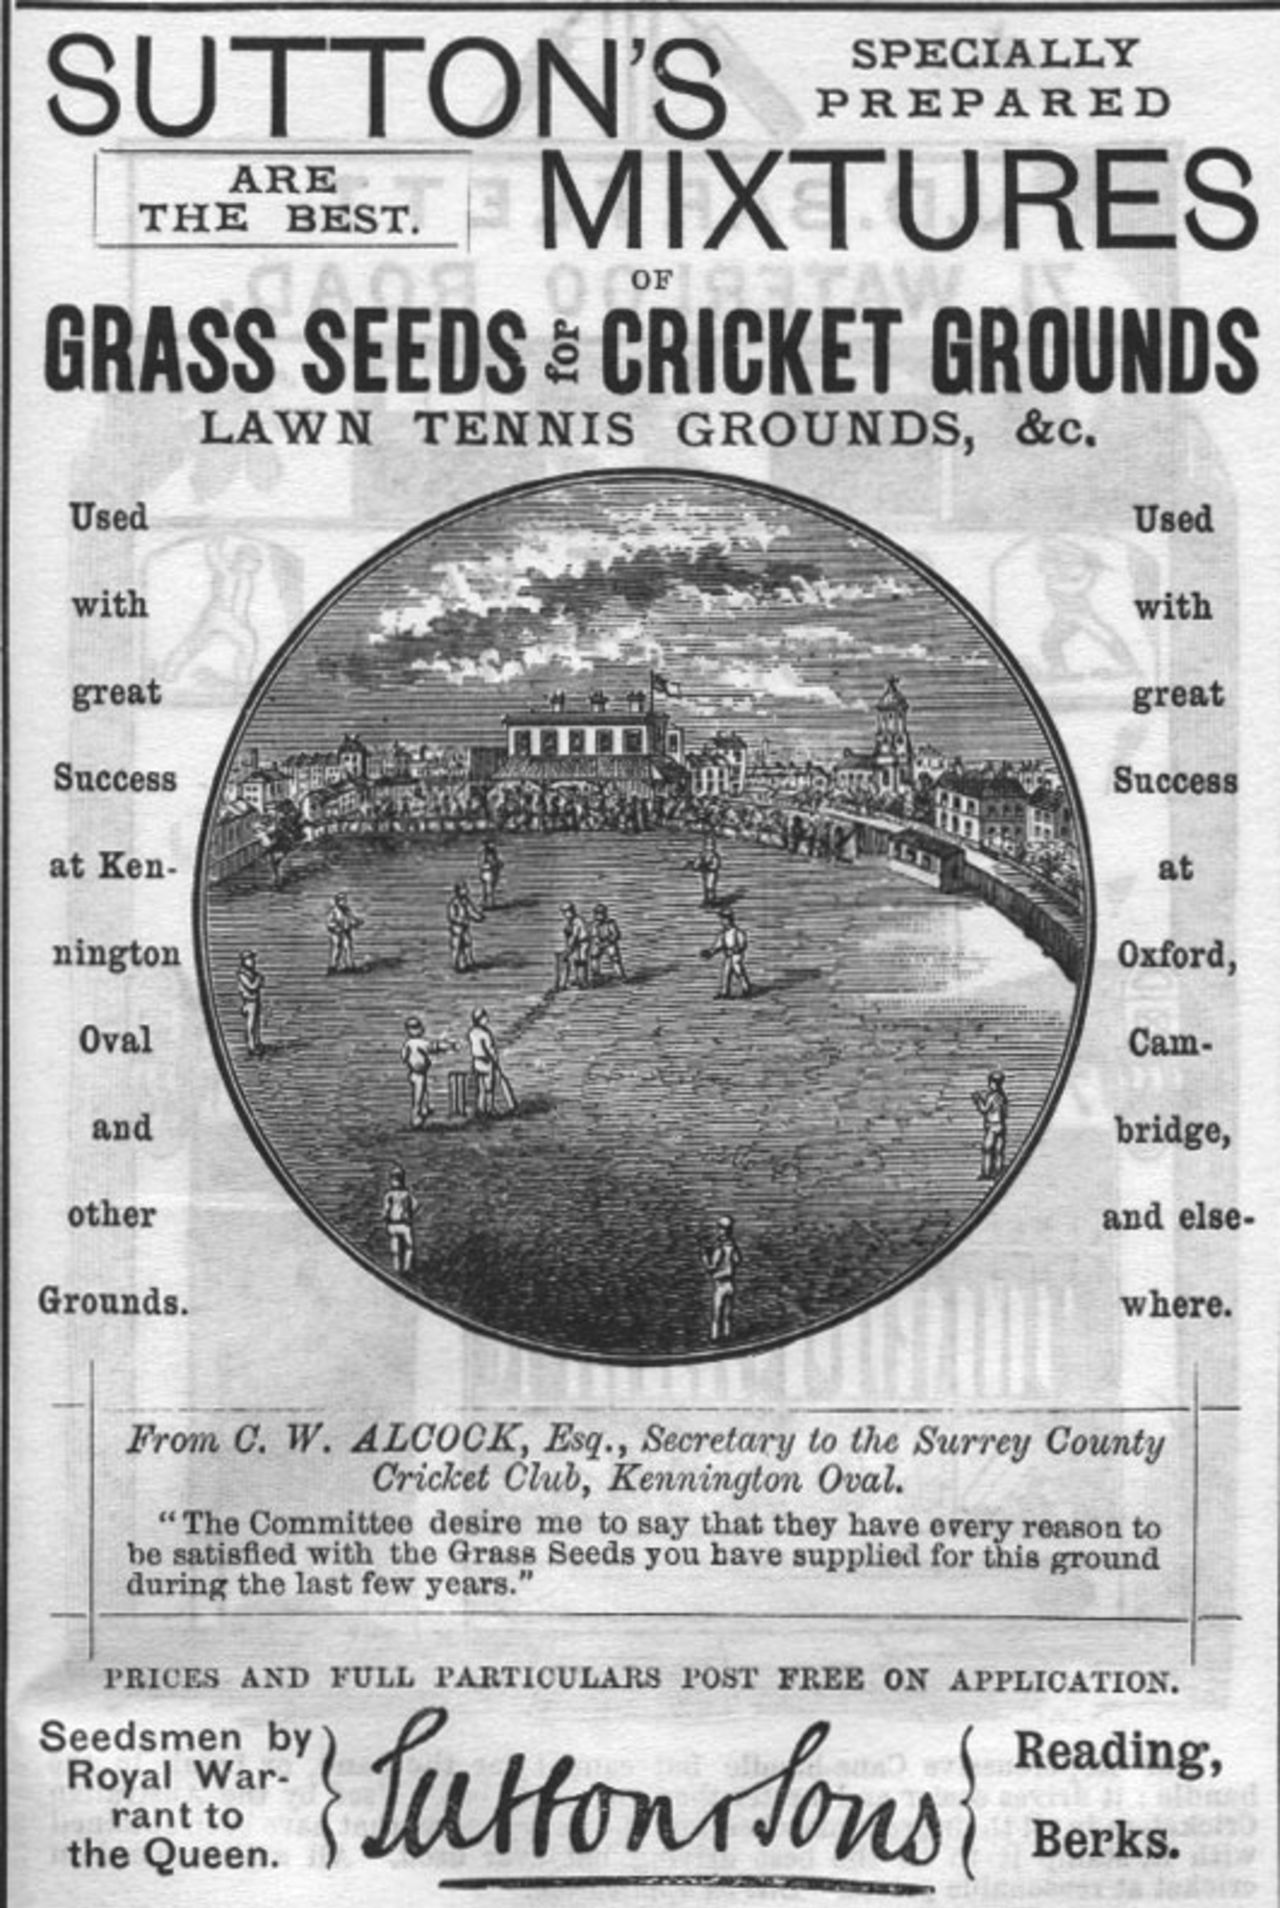 An advertisement for Sutton's Mixtures, a grass seed, in the the 1884 edition of the Wisden Cricketers' Almanack